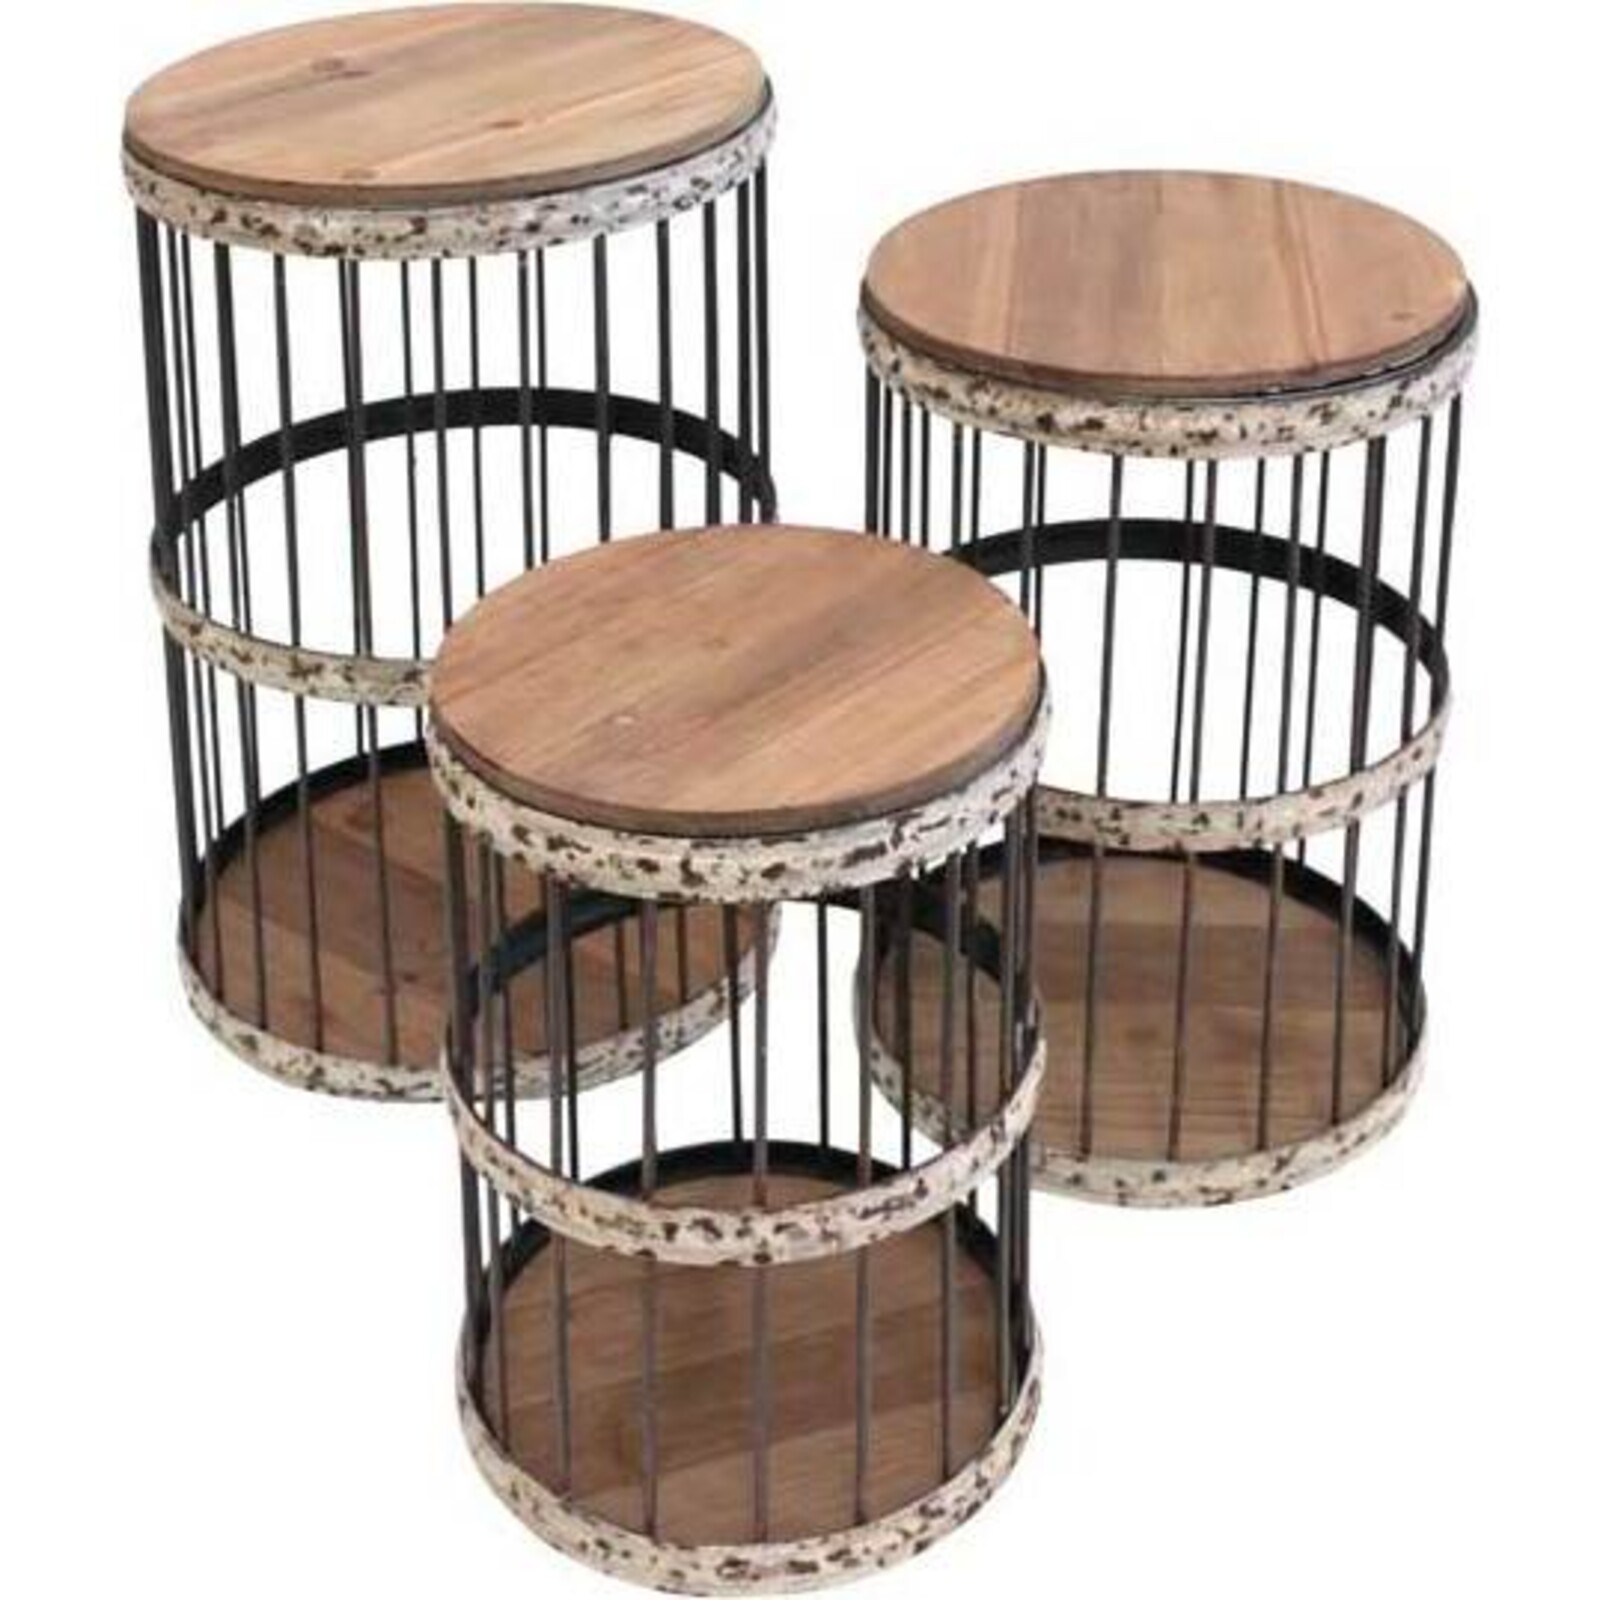 Nest of Tables Rustic Band S/3